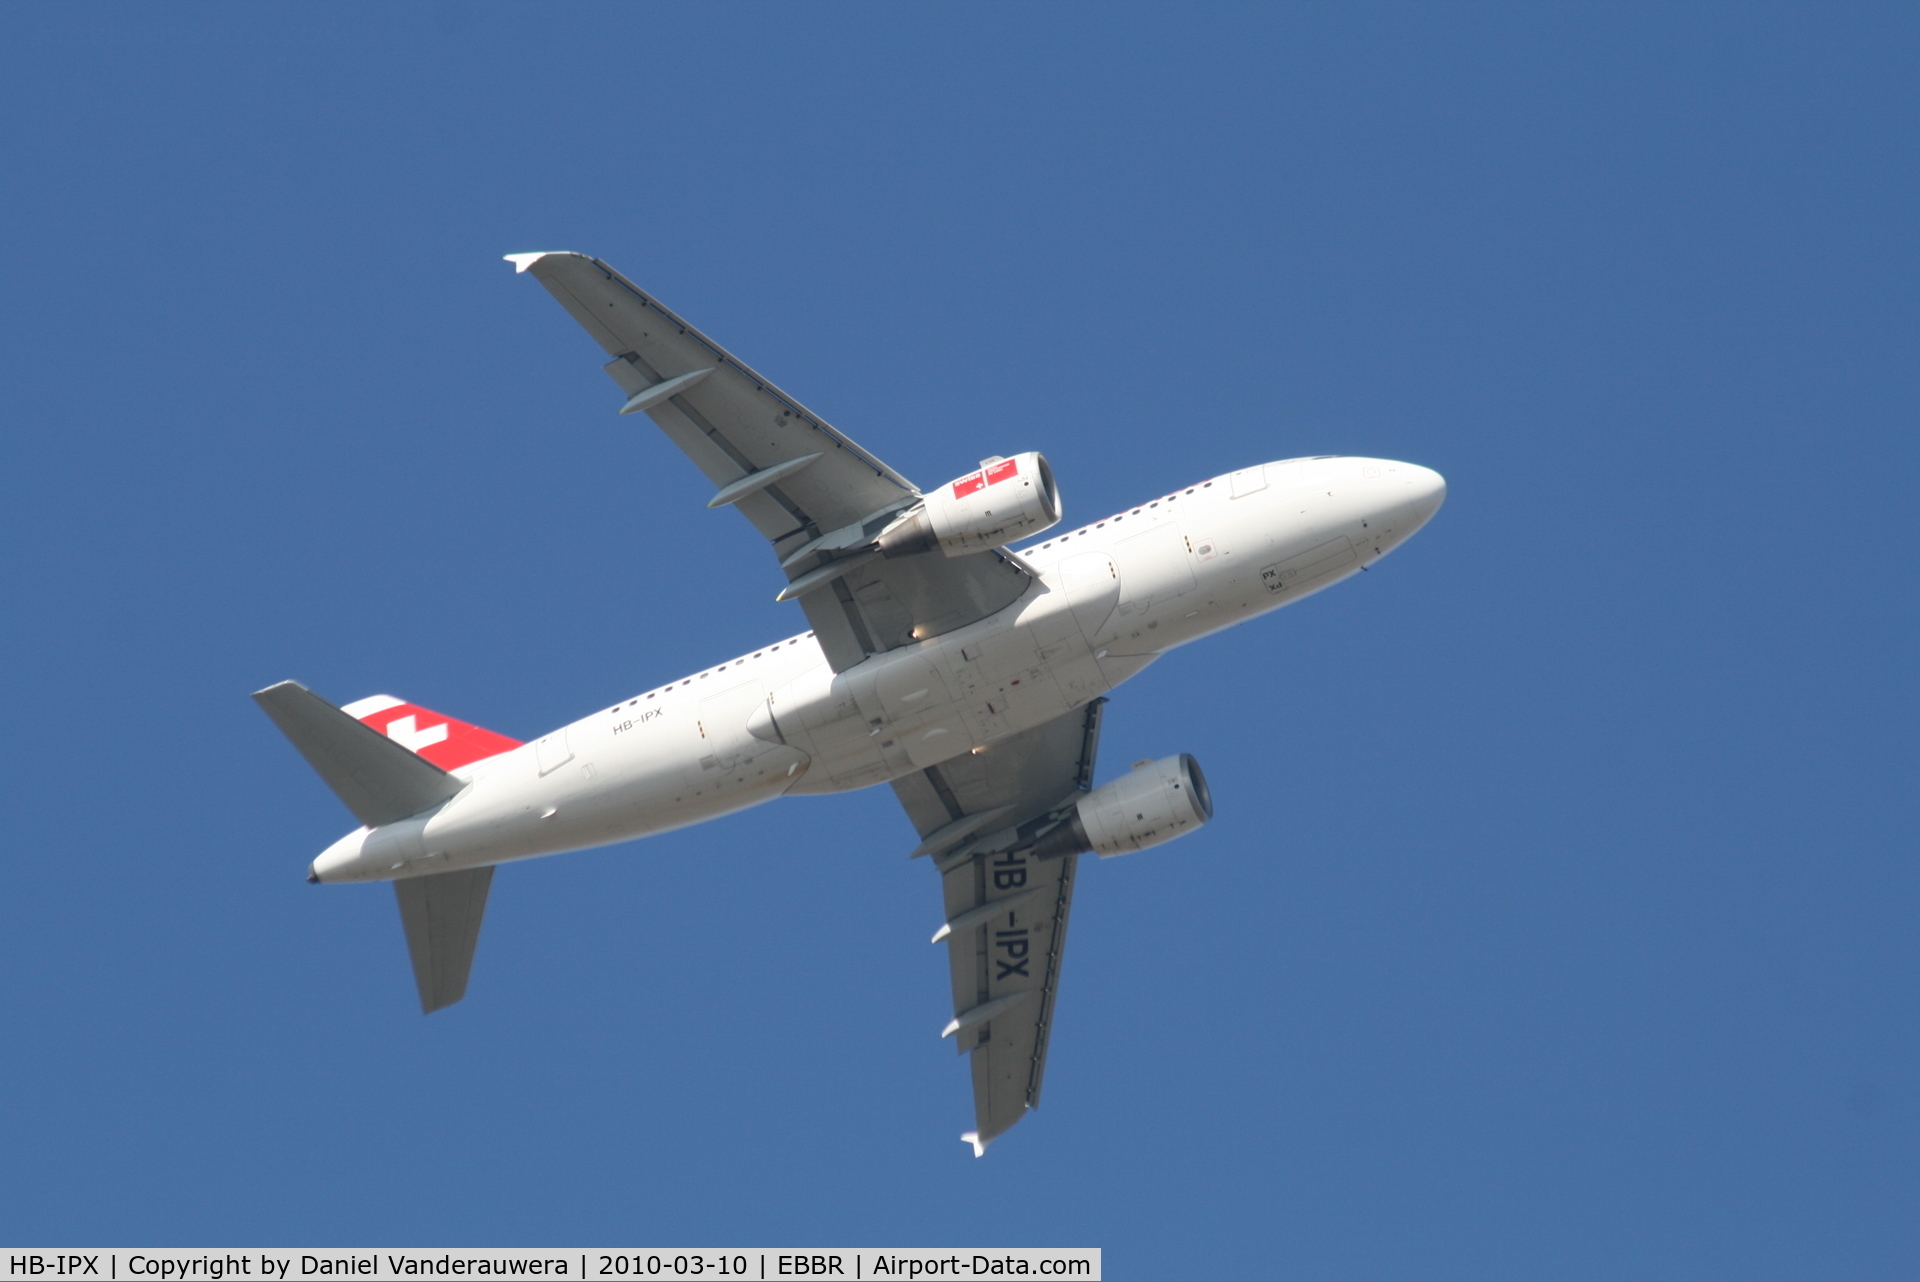 HB-IPX, 1996 Airbus A319-112 C/N 612, Flight LX779 is climbing from RWY 07R